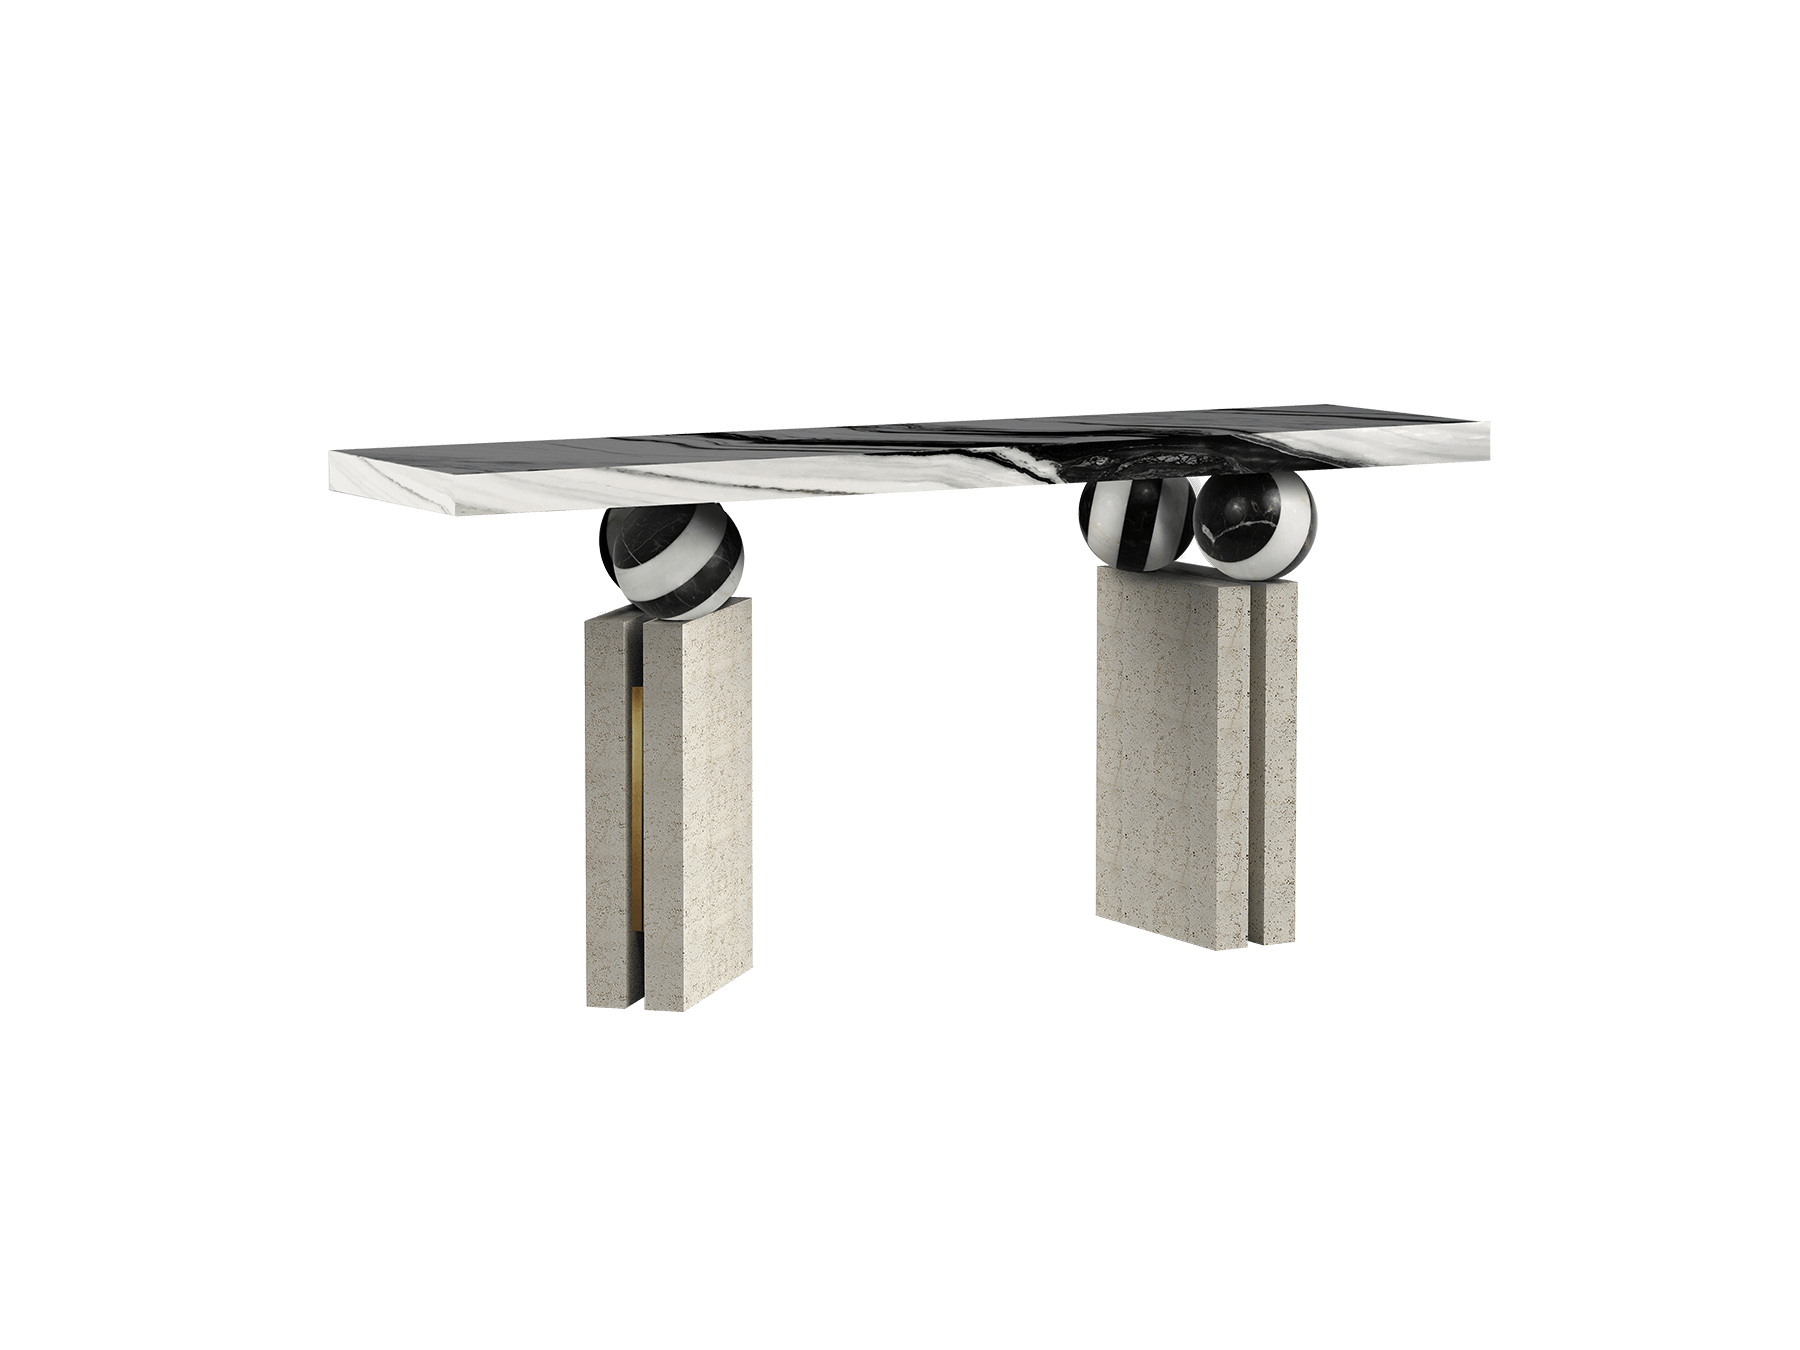 quantic futuristic console table for luxury entrance hall project